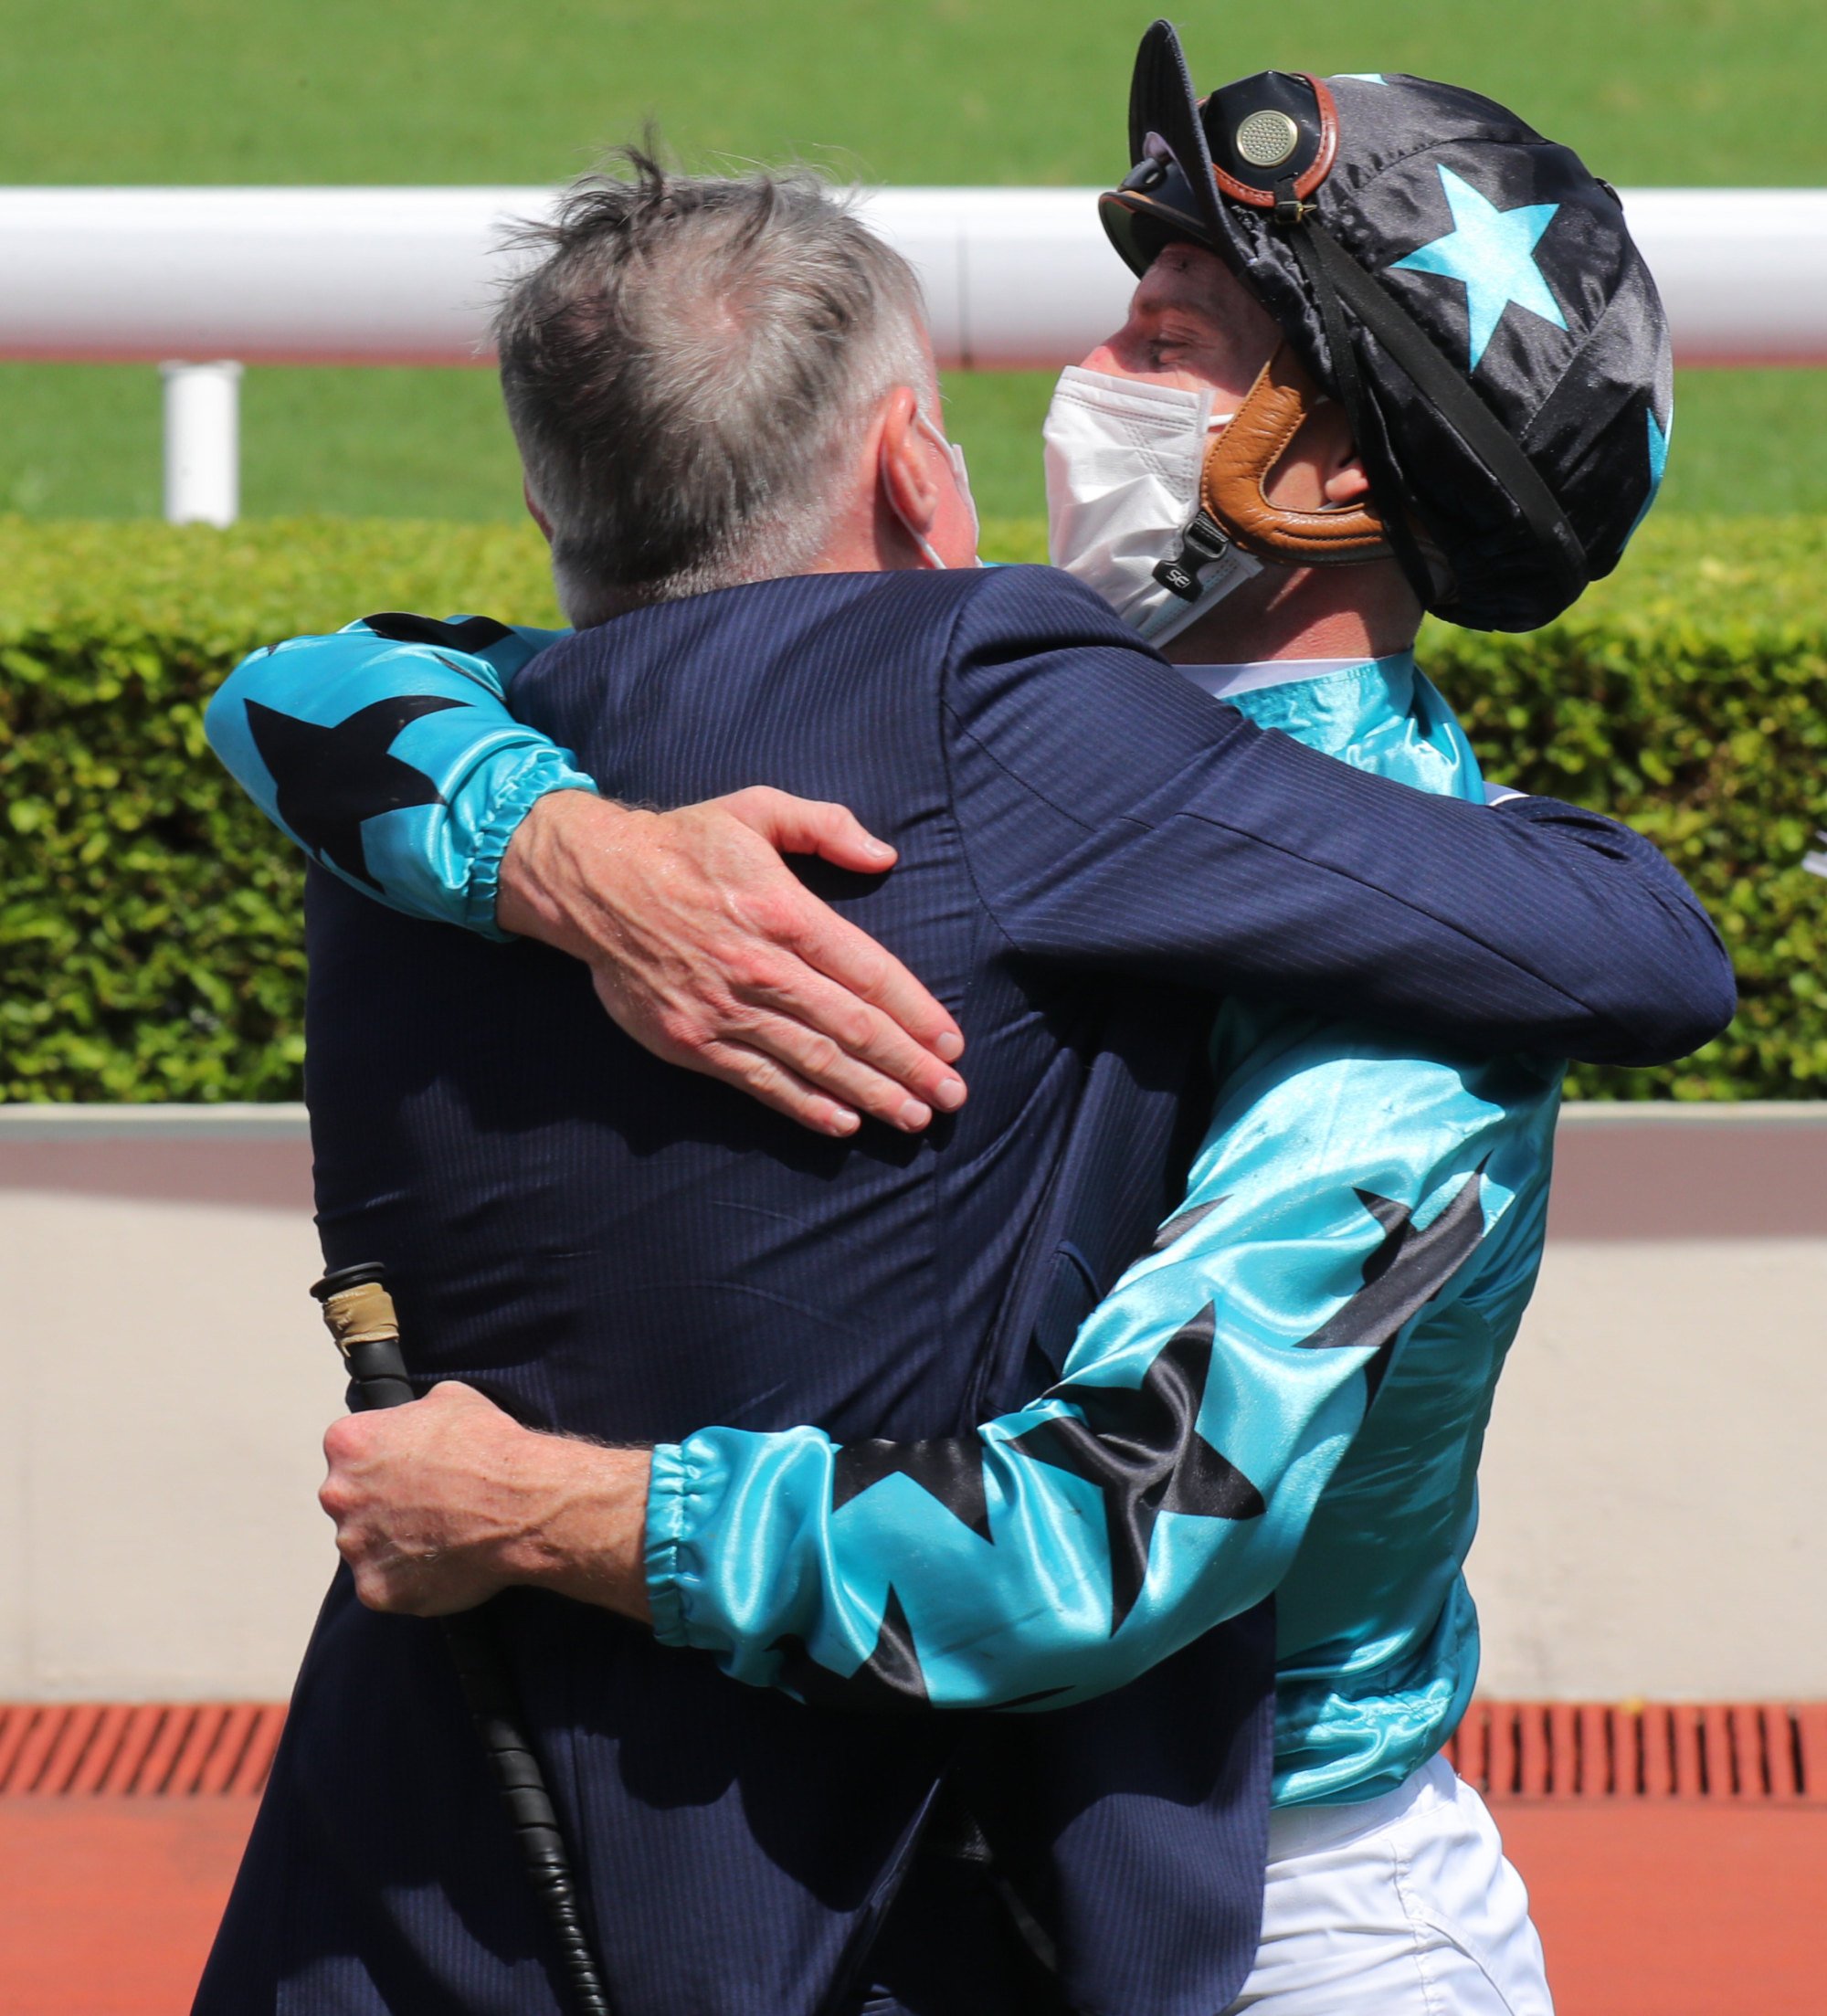 Paul O’Sullivan and Zac Purton embrace after Turquoise Alpha’s victory.